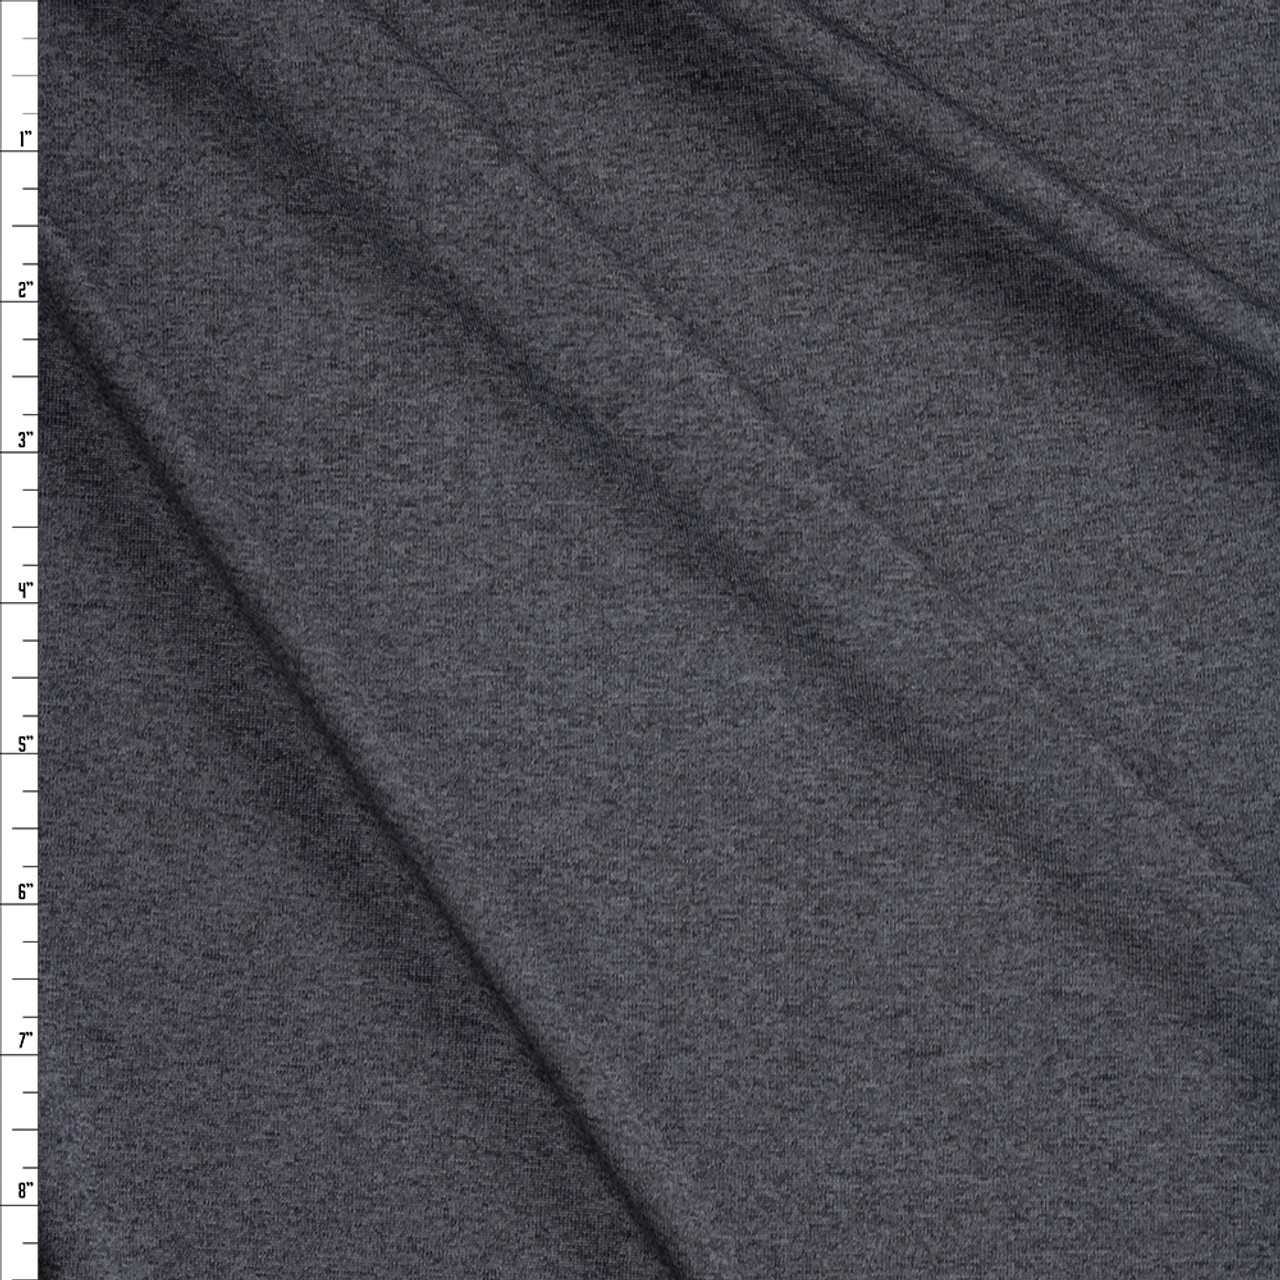 Cali Fabrics Charcoal Heather Moisture Wicking Designer Athletic Knit Fabric  by the Yard